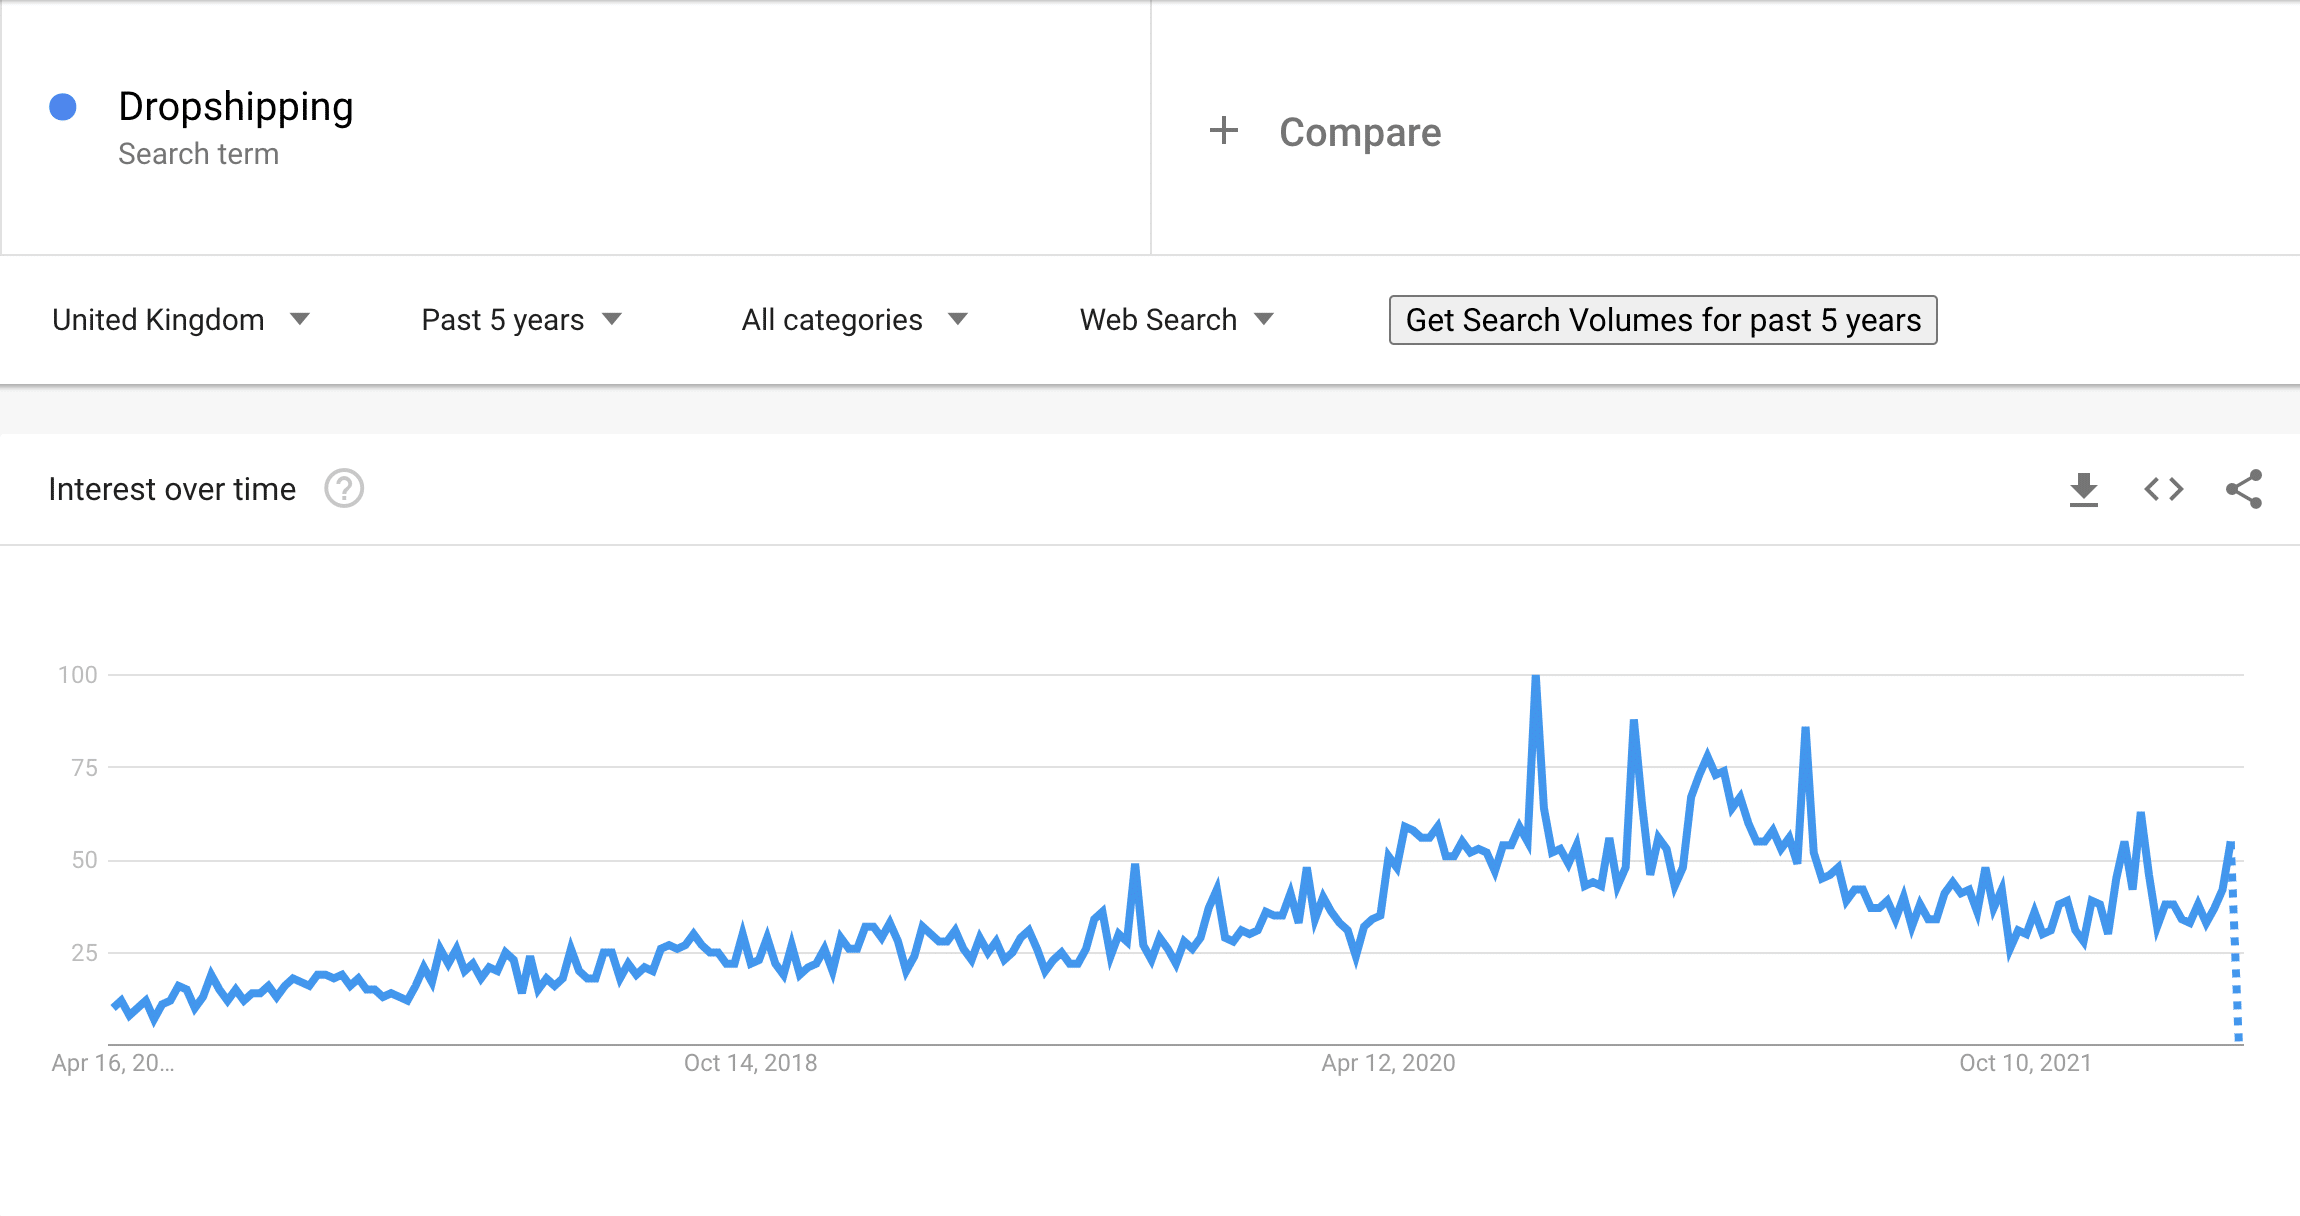 Dropshipping trend in the UK